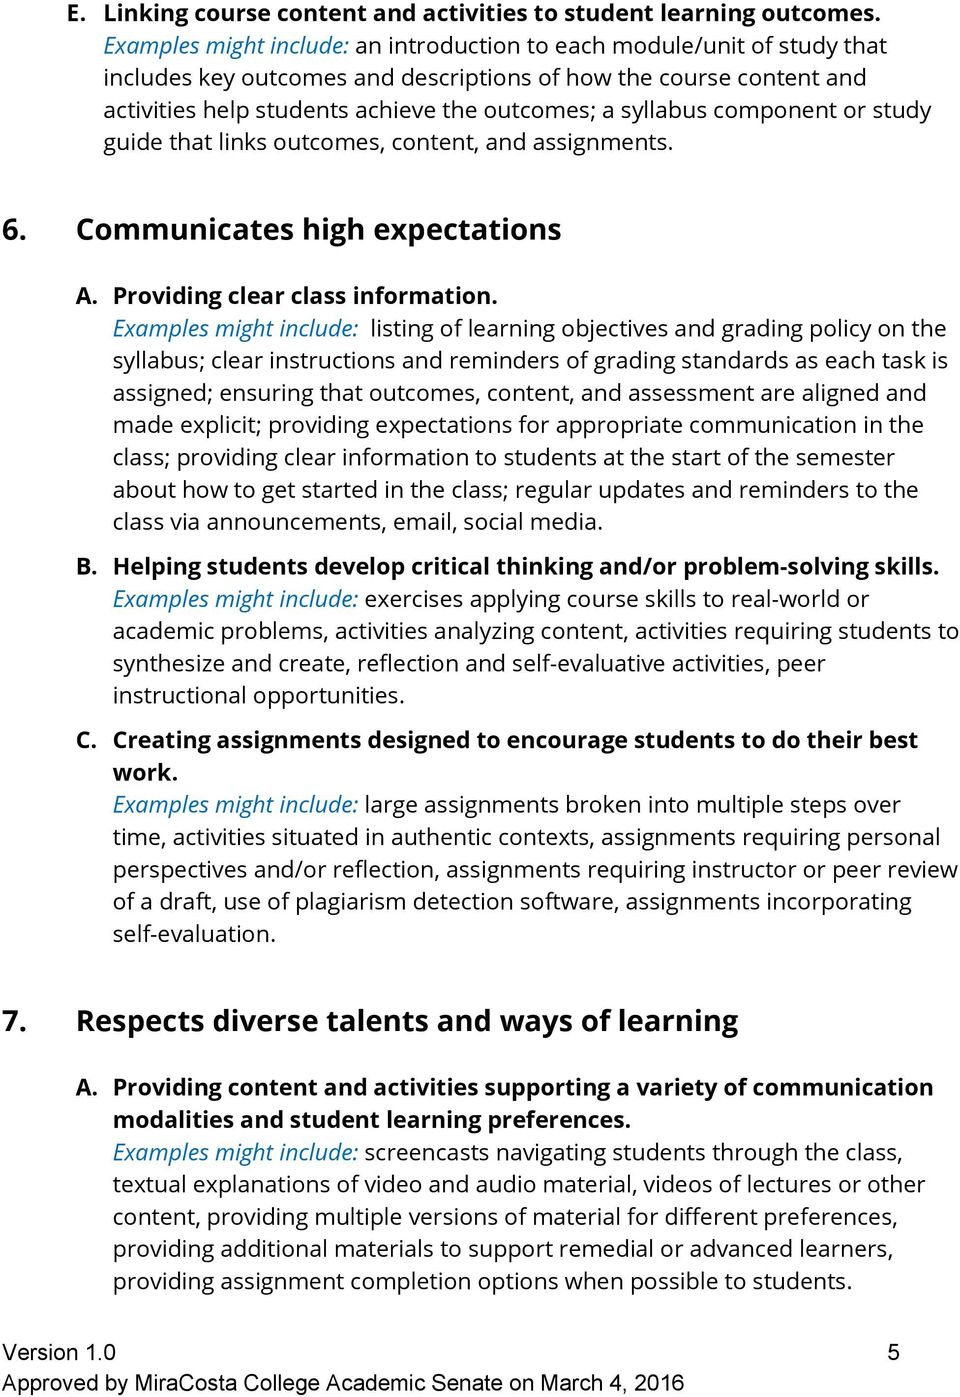 syllabus component or study guide that links outcomes, content, and assignments. 6. Communicates high expectations A. Providing clear class information.